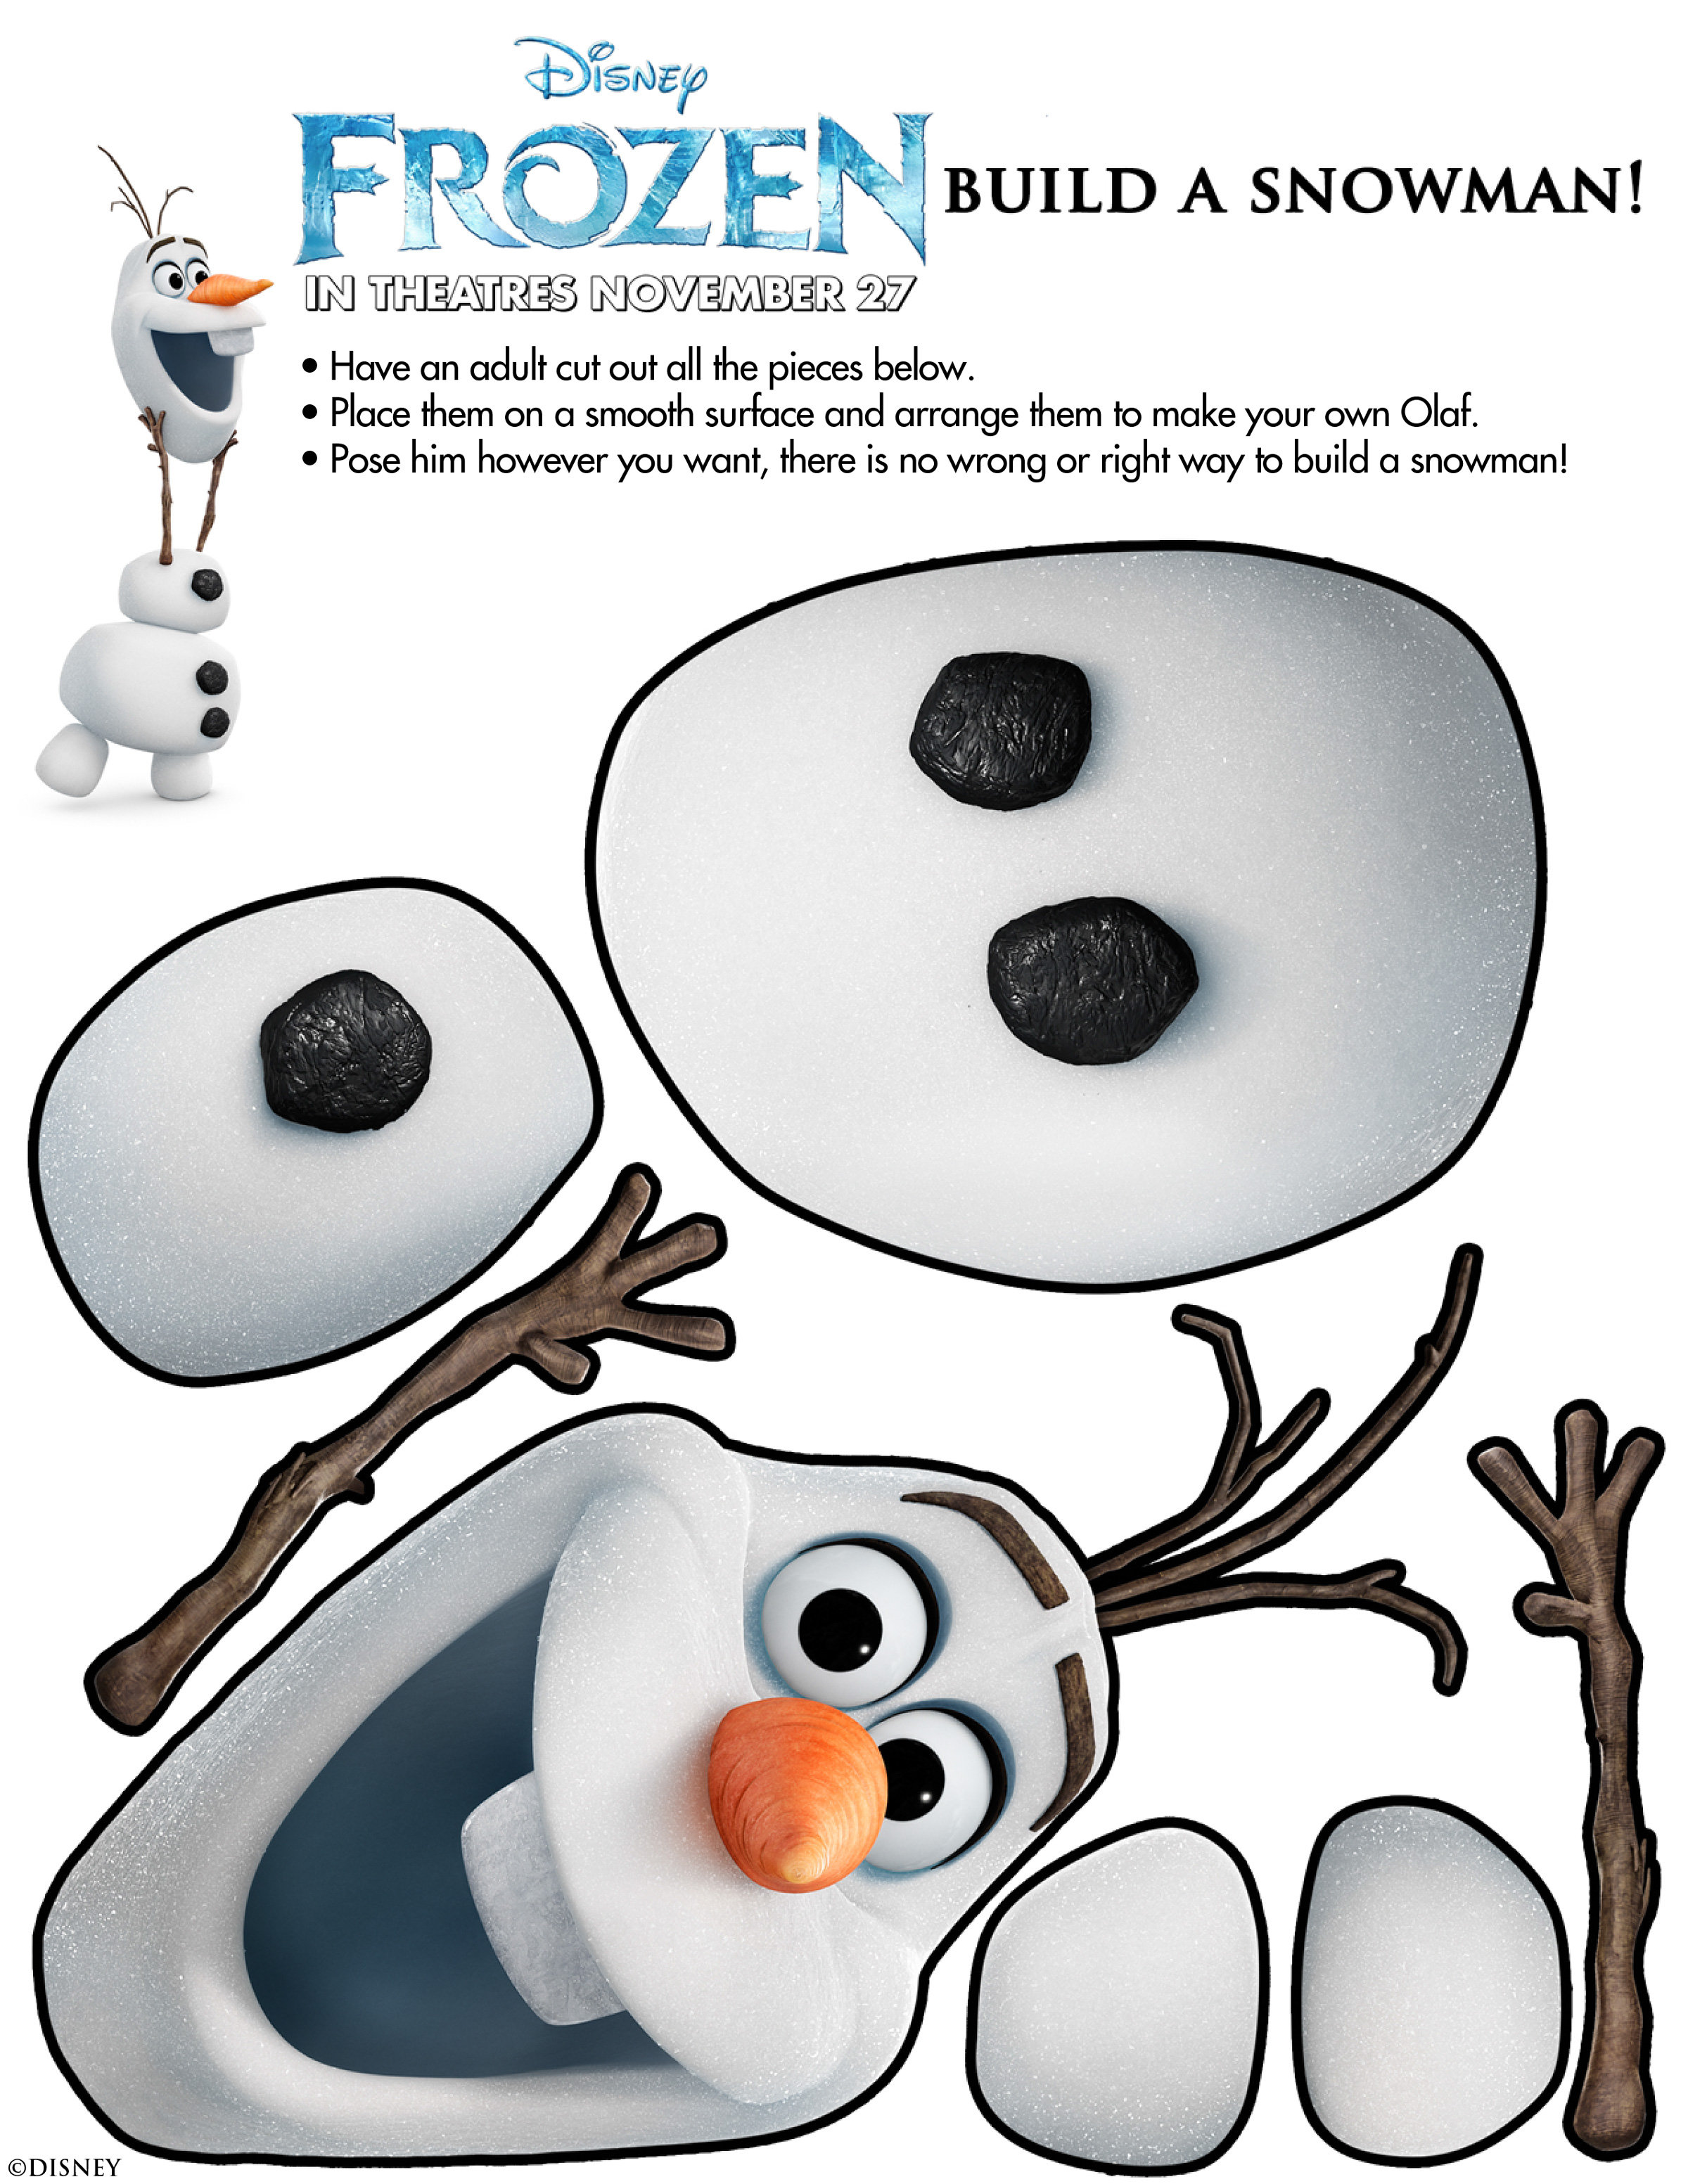 Olaf Printable from Disney Frozen olaf template for crafts!